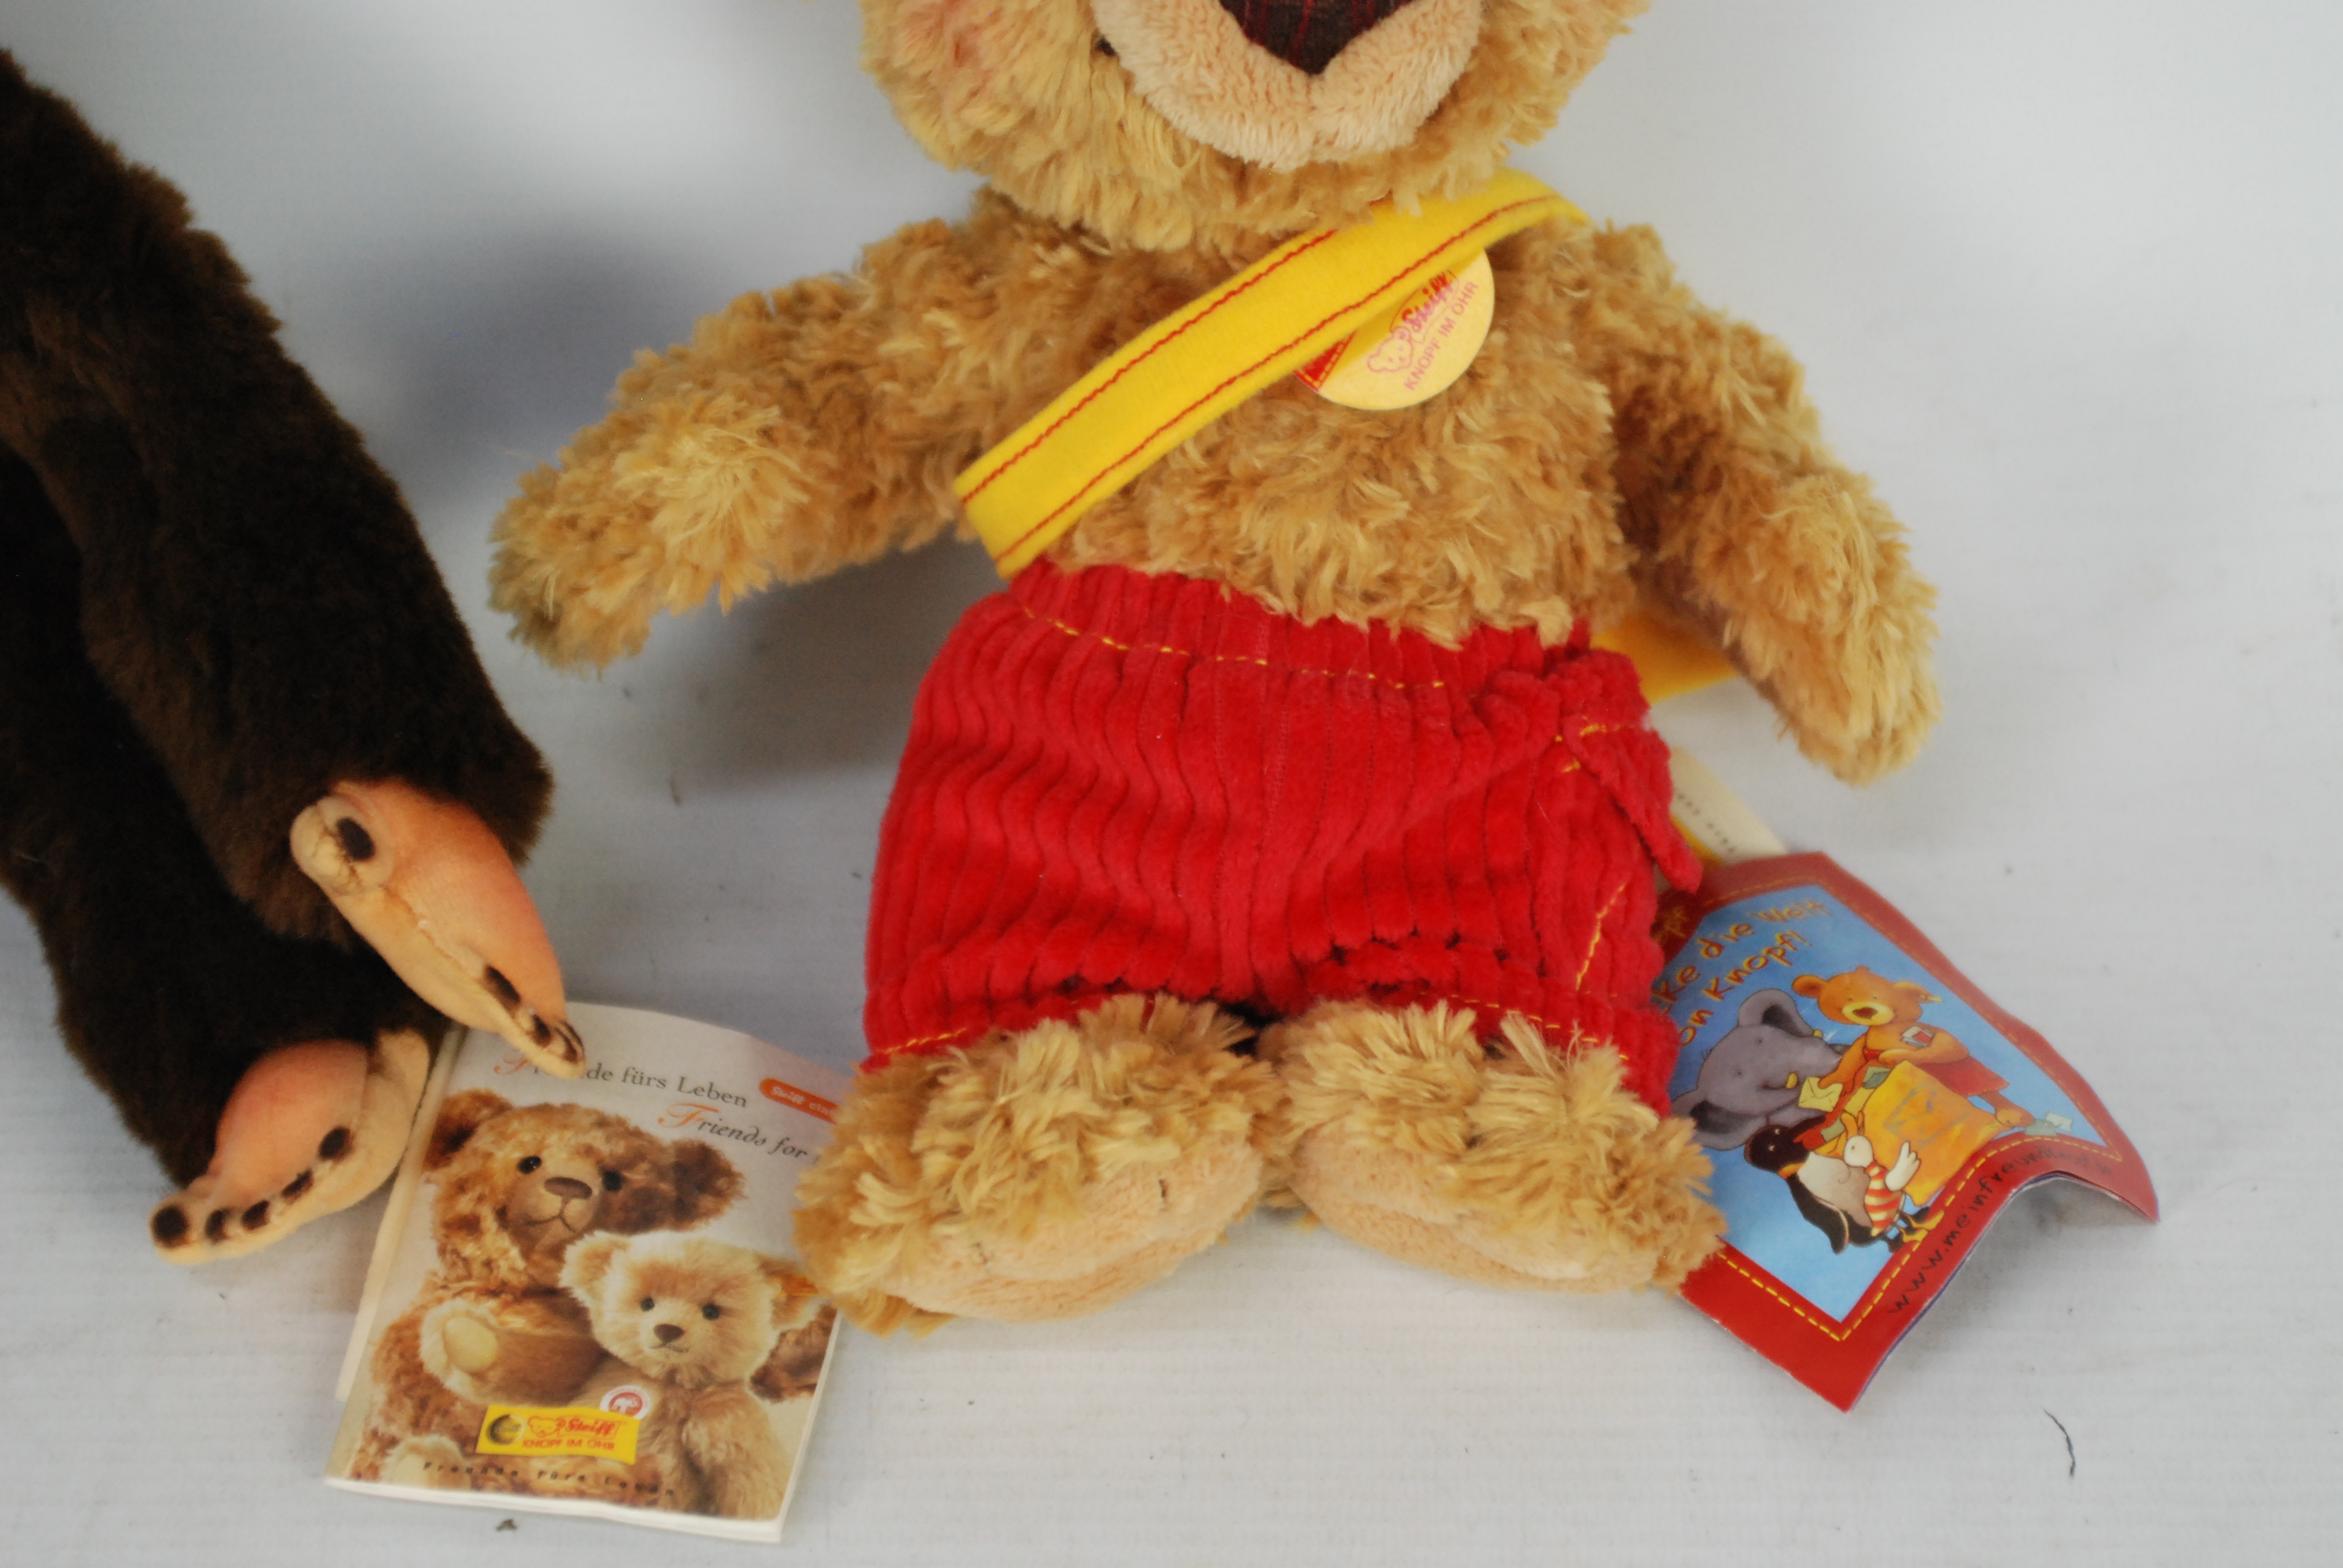 Steiff - Two Steiff bears - Lot includes a 'Jocko' monkey with yellow tag on its ear. - Image 5 of 6